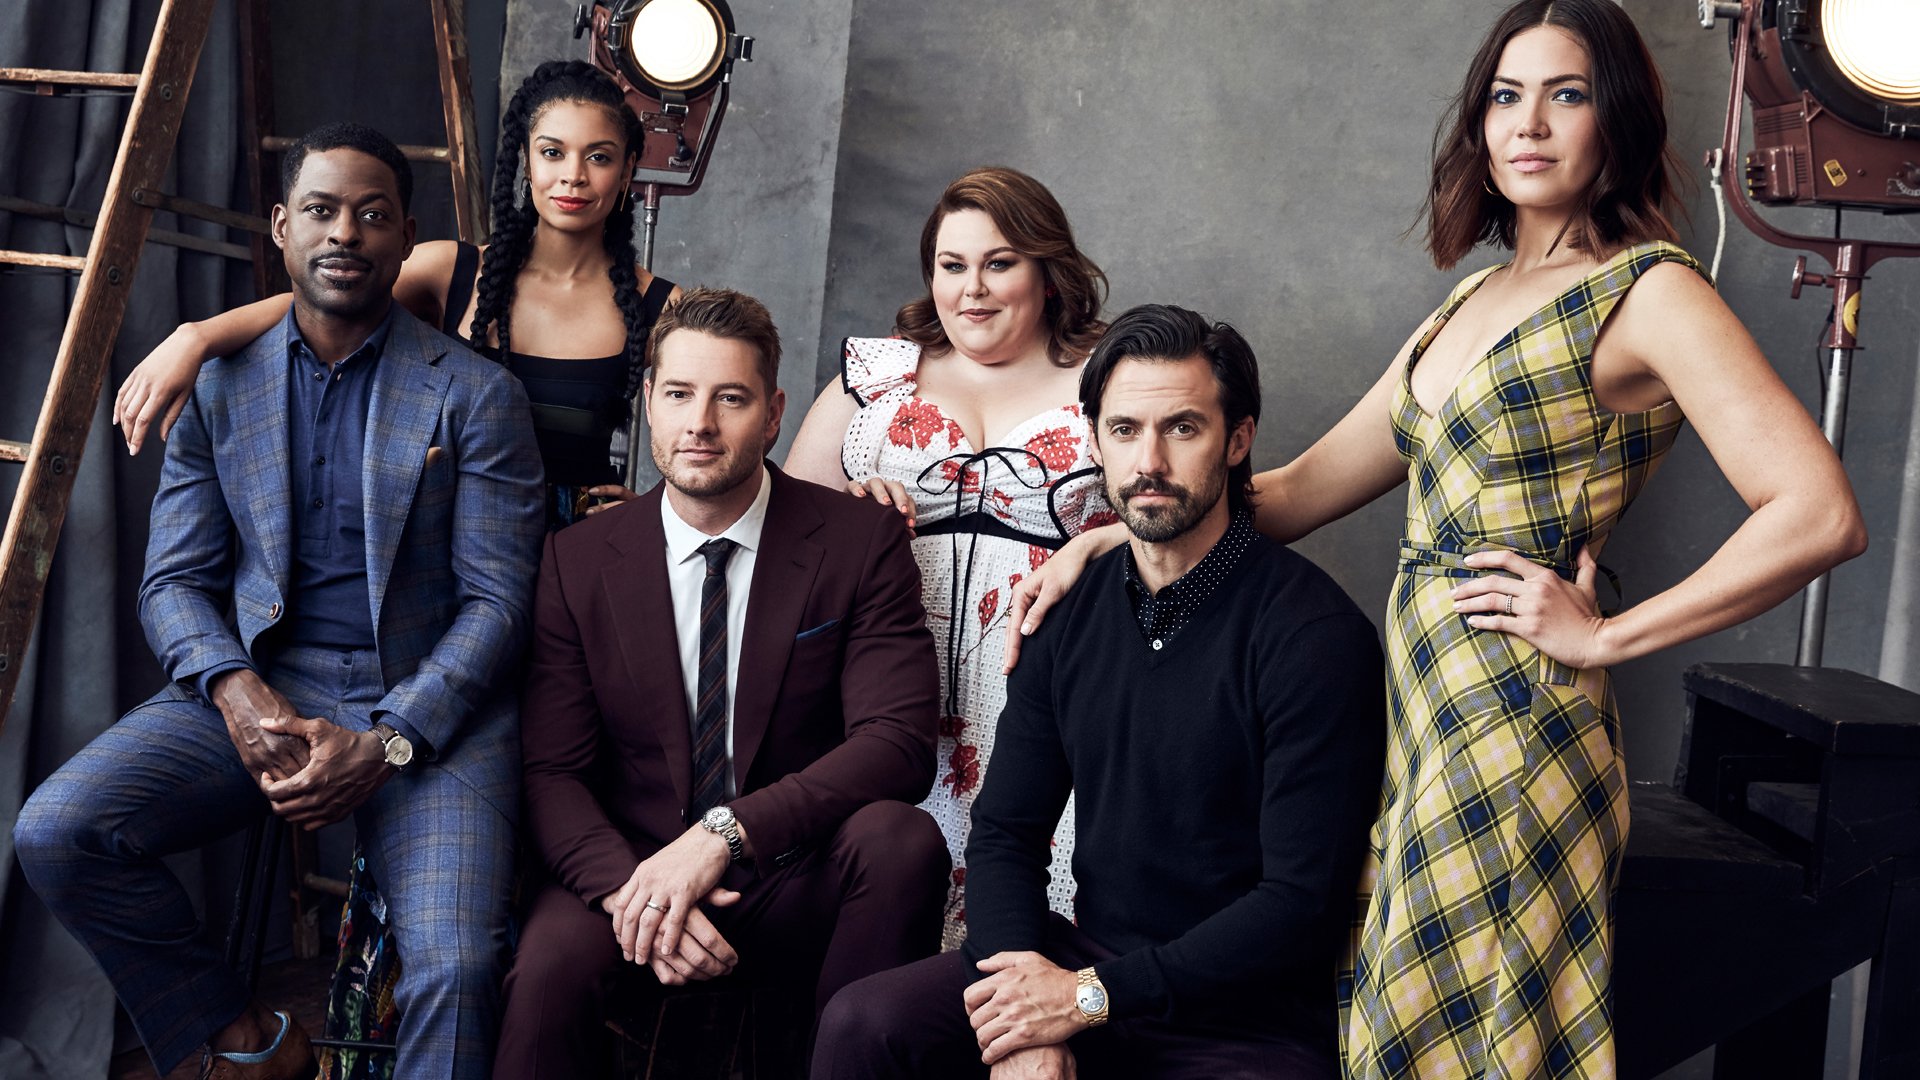 Portrait studio photo of ‘This Is Us’ cast members Sterling K. Brown, Susan Kelechi Watson, Justin Hartley, Chrissy Metz, Milo Ventimiglia, and Mandy Moore